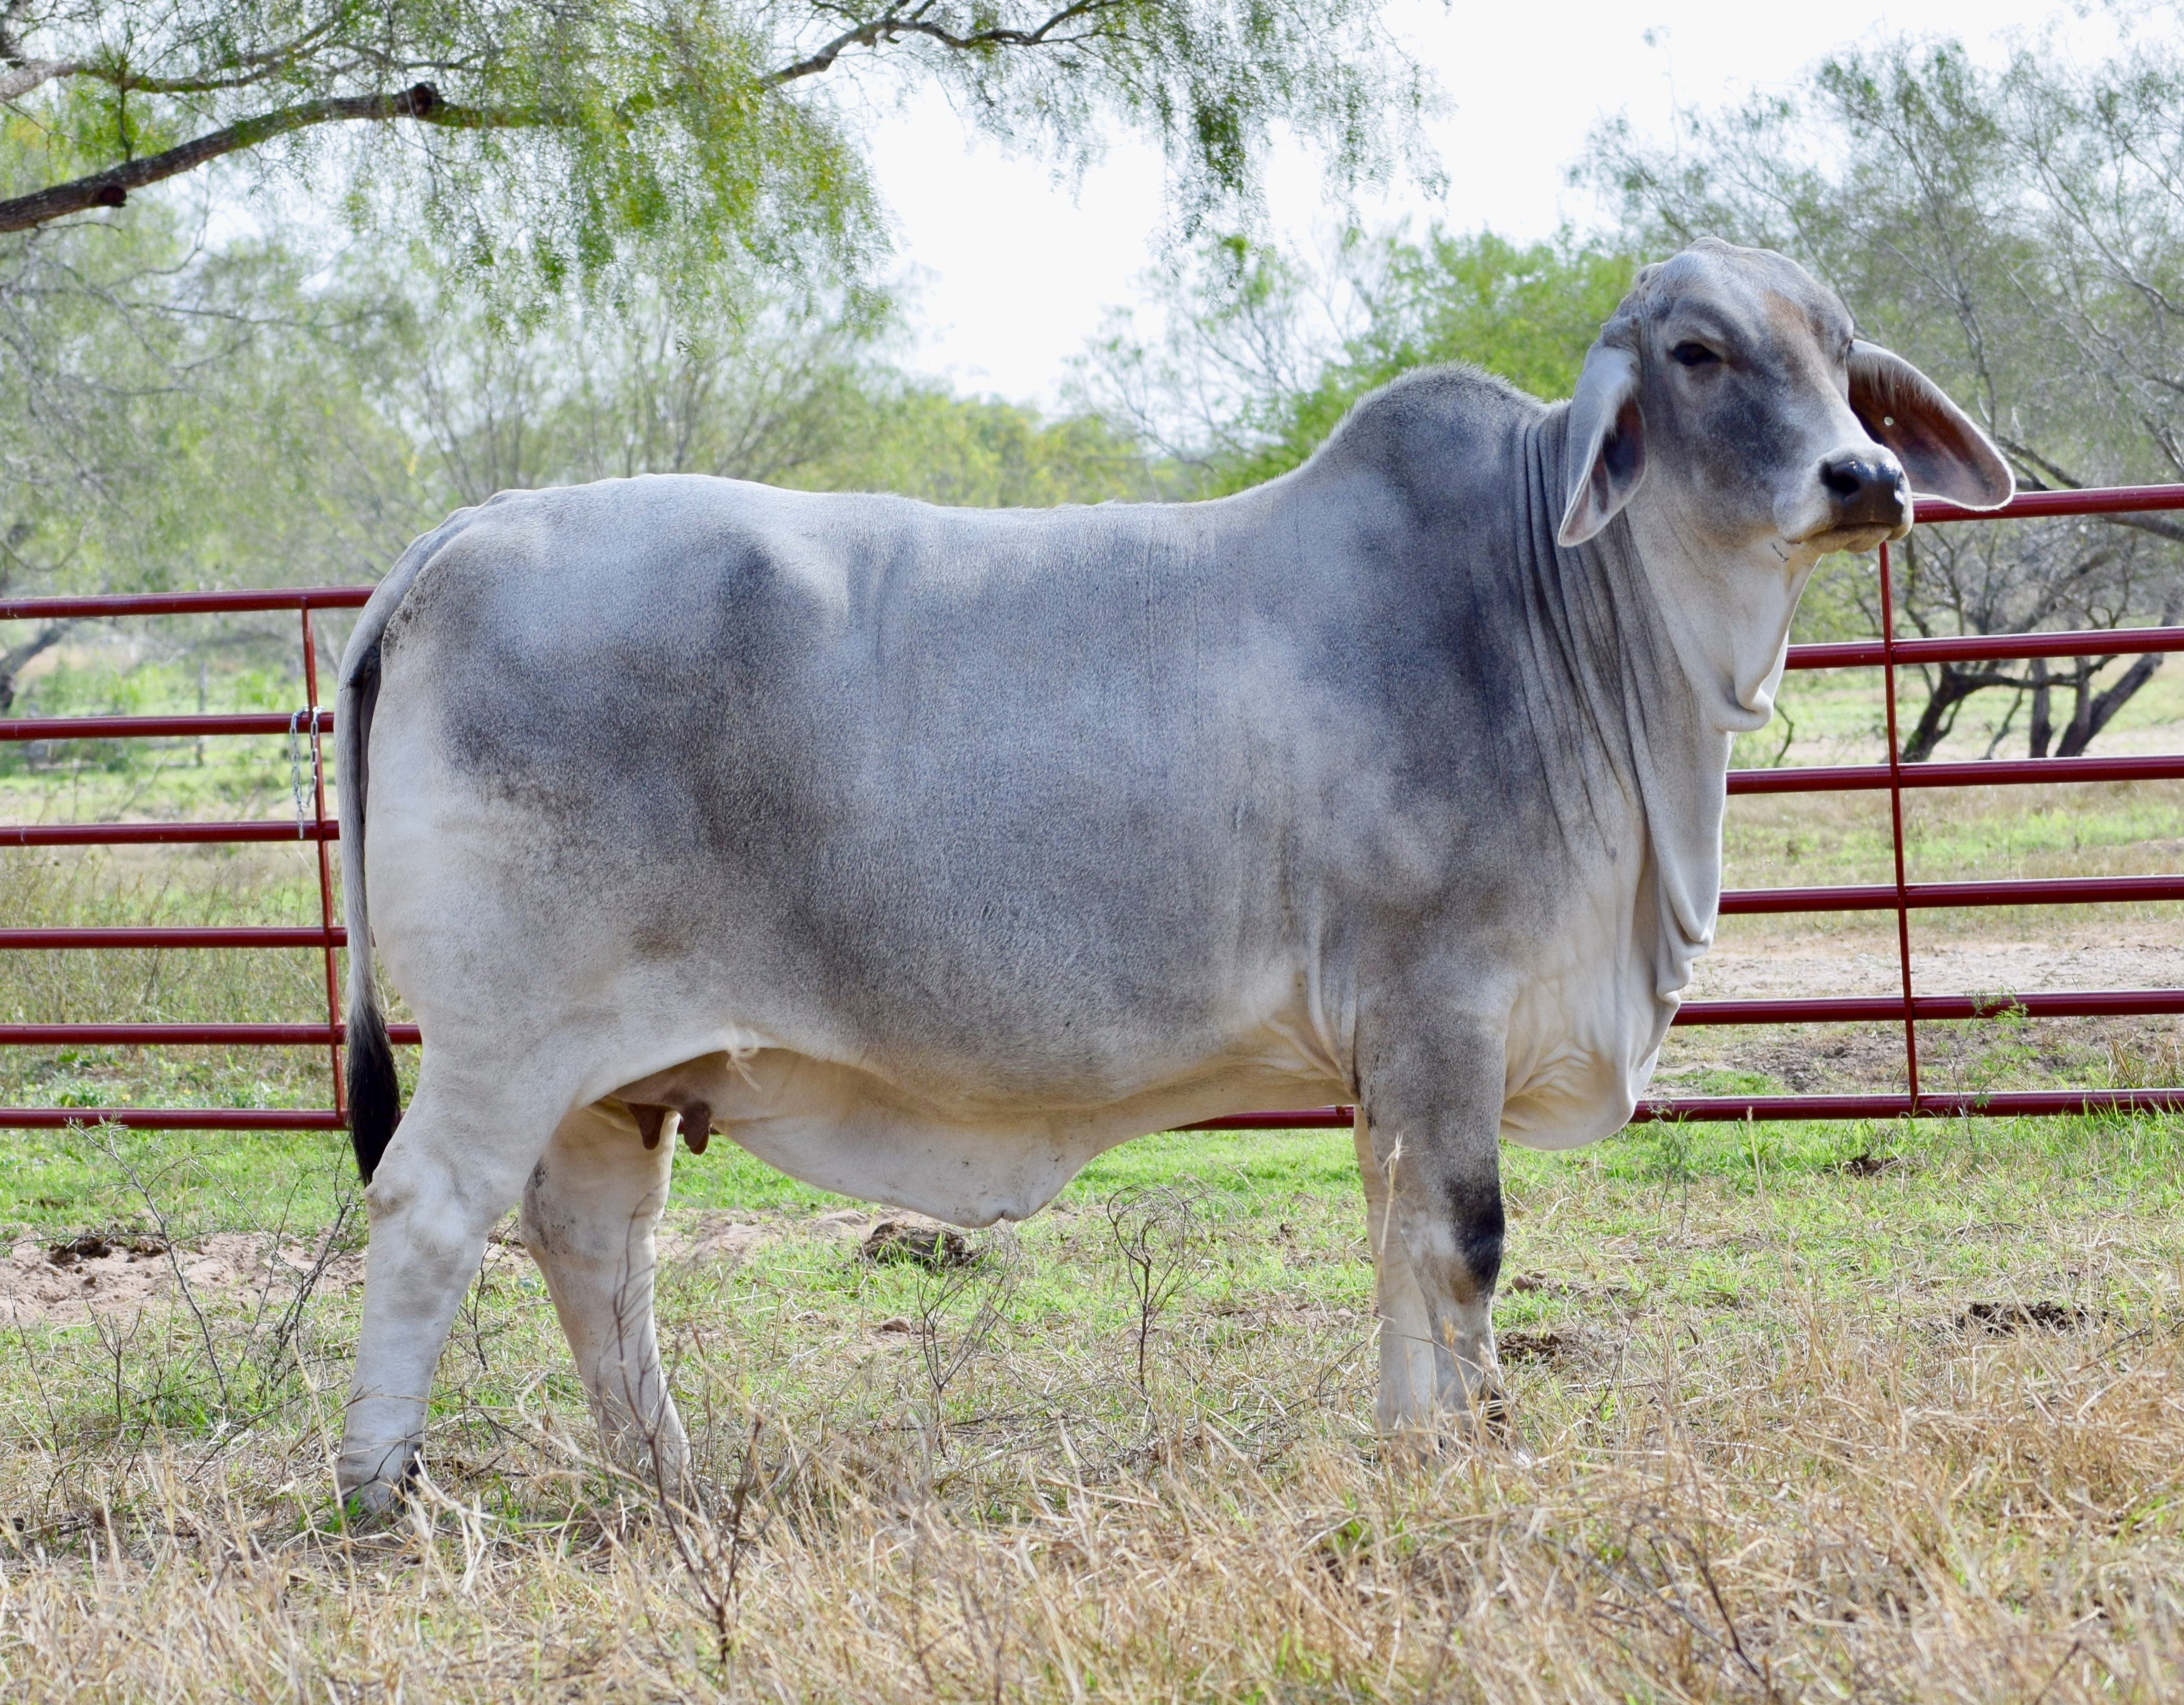 Mr. HMC Polled 111/1 (PP) “One for the Money” HOMOZYGOUS POLLED SEXED FEMALE SEMEN AI PACKAGE